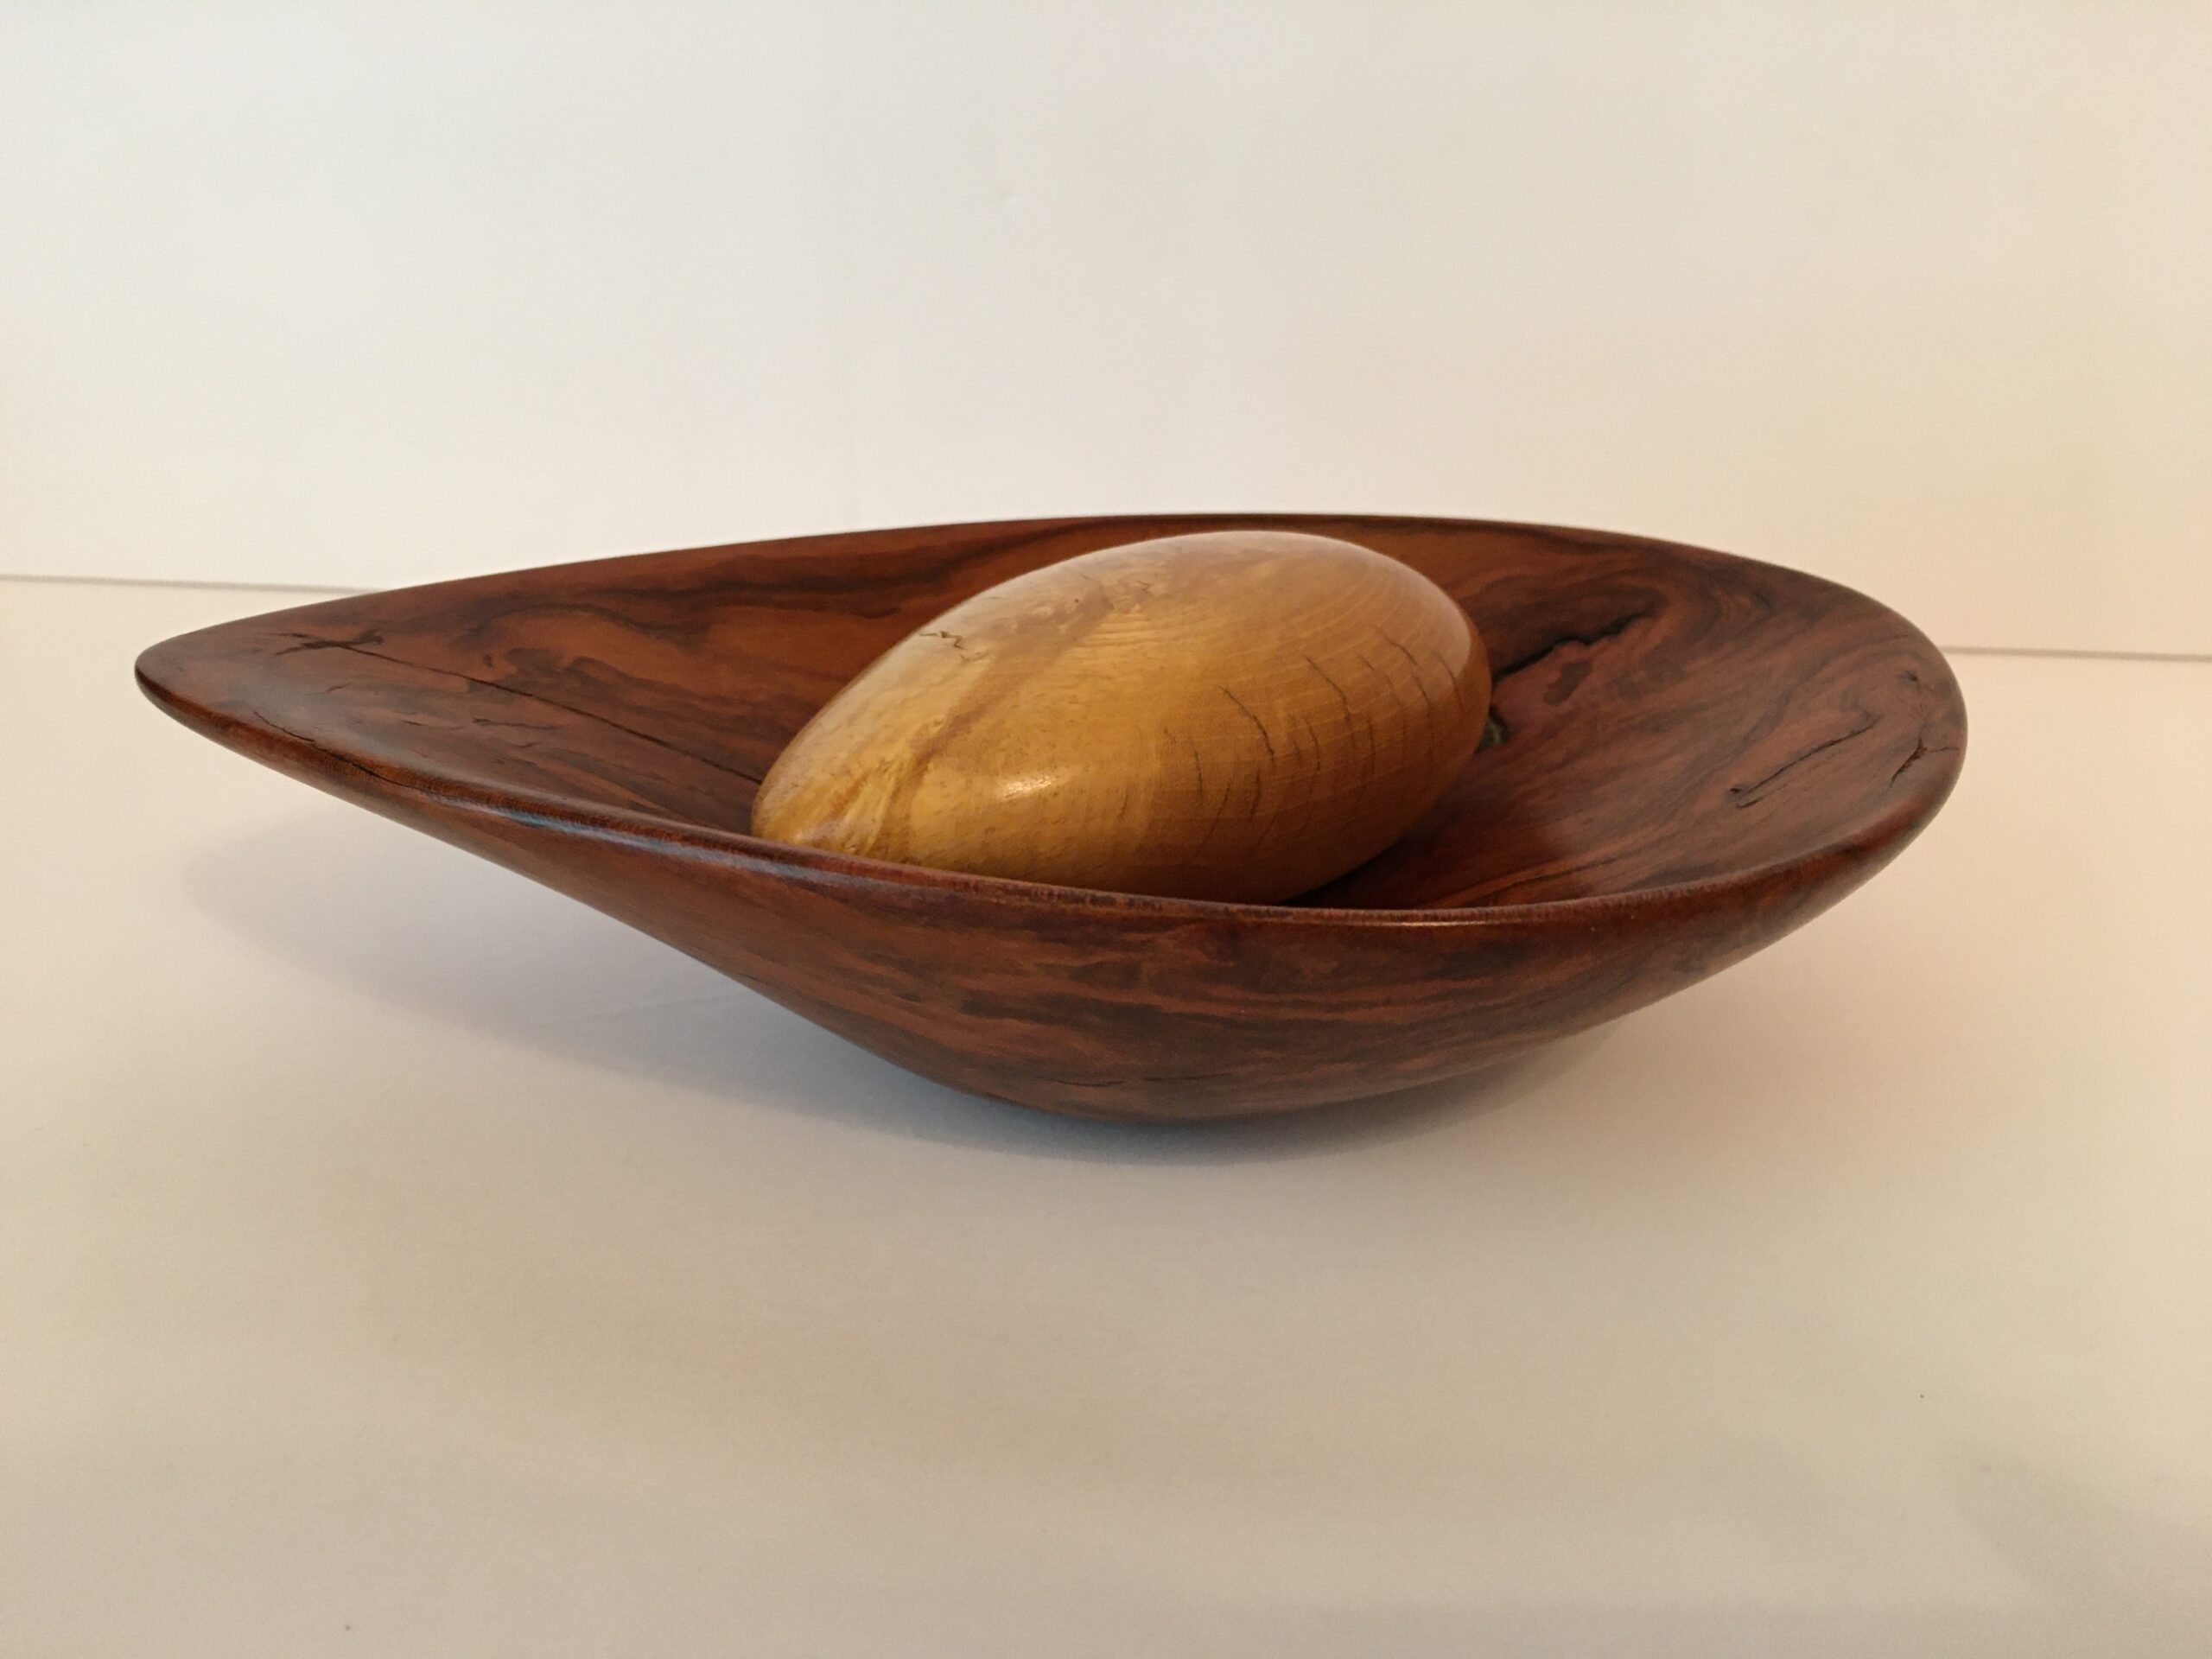 Wood Bowl Abstract Sculpture Texas Hill Country Artist David Day